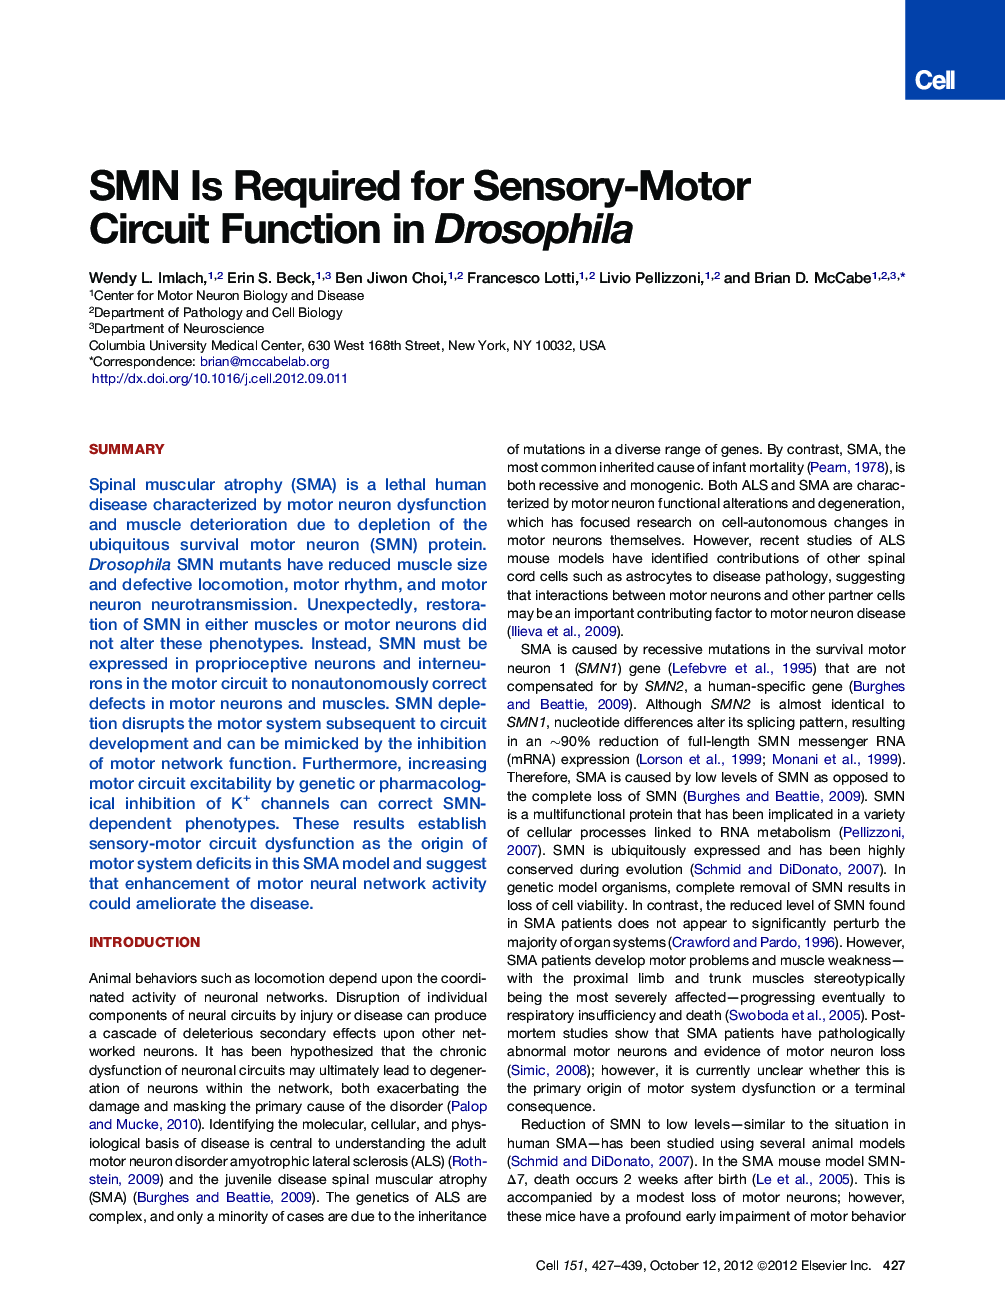 SMN Is Required for Sensory-Motor Circuit Function in Drosophila